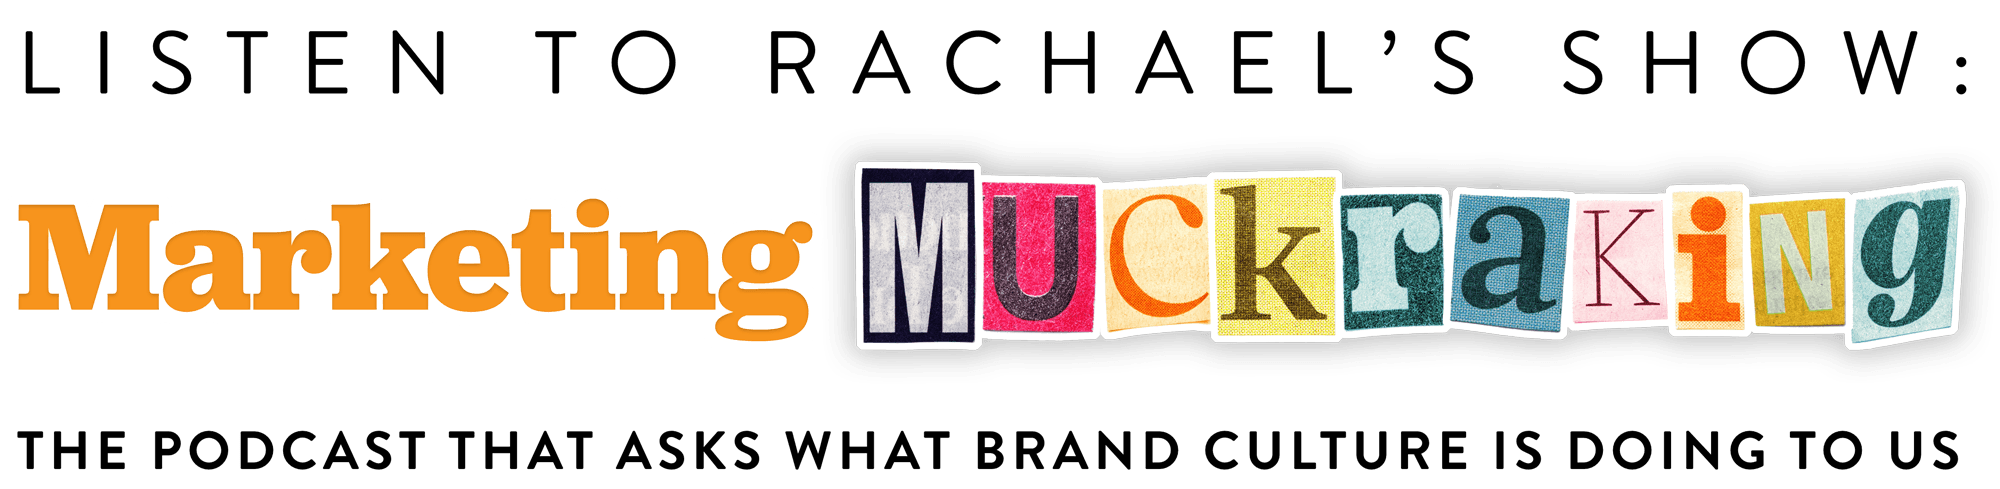 Listen to Rachael's show "Marketing Muckraking," the podcast that asks what brand culture is doing to us